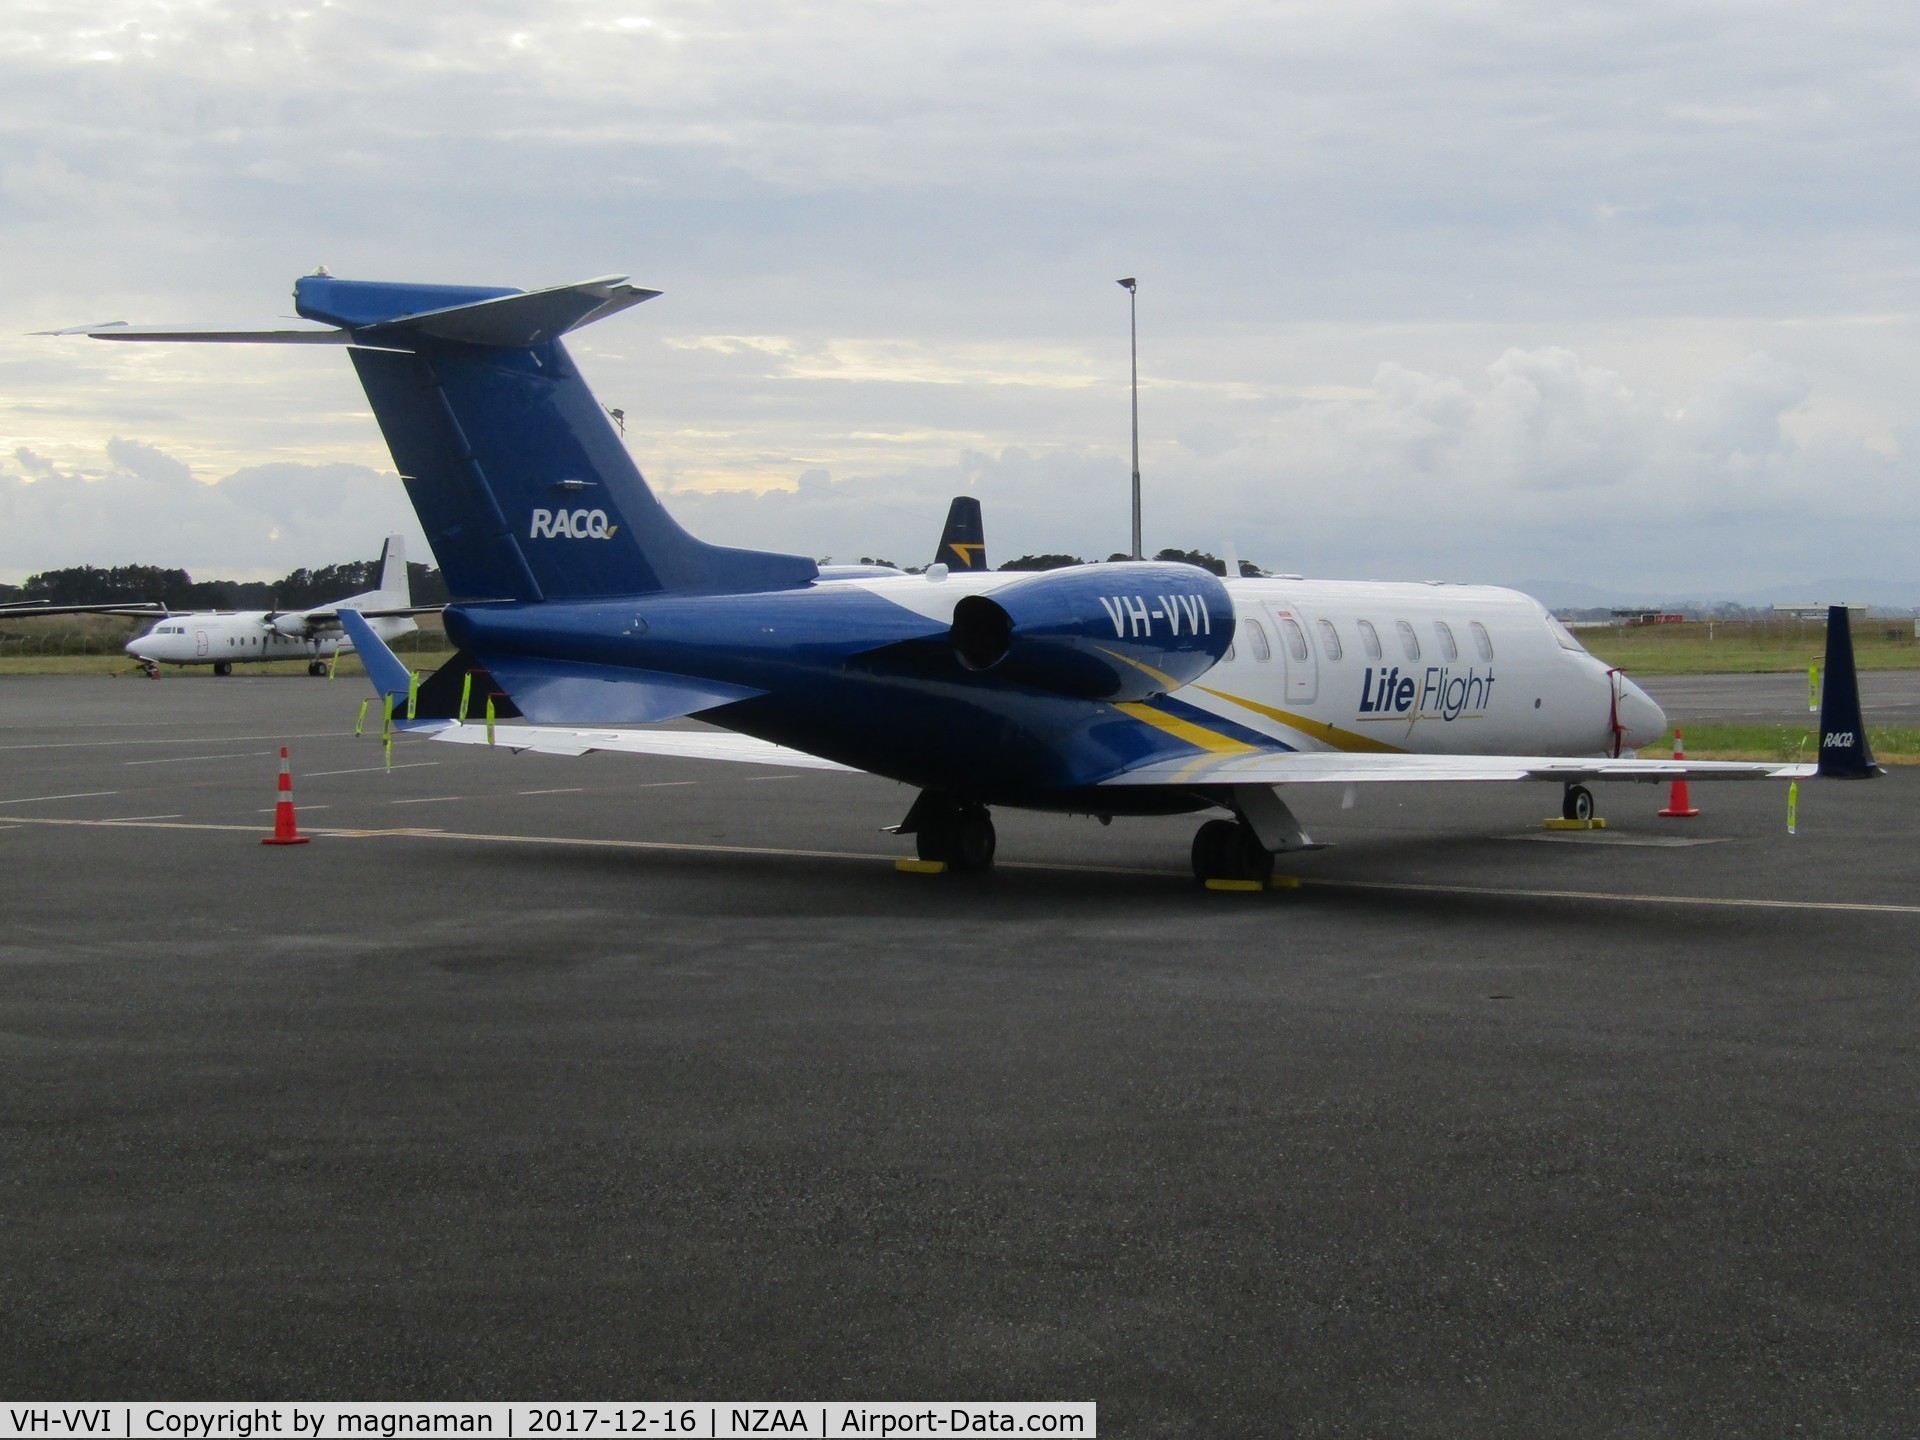 VH-VVI, 2004 Learjet 45 C/N 262, worth getting up for today